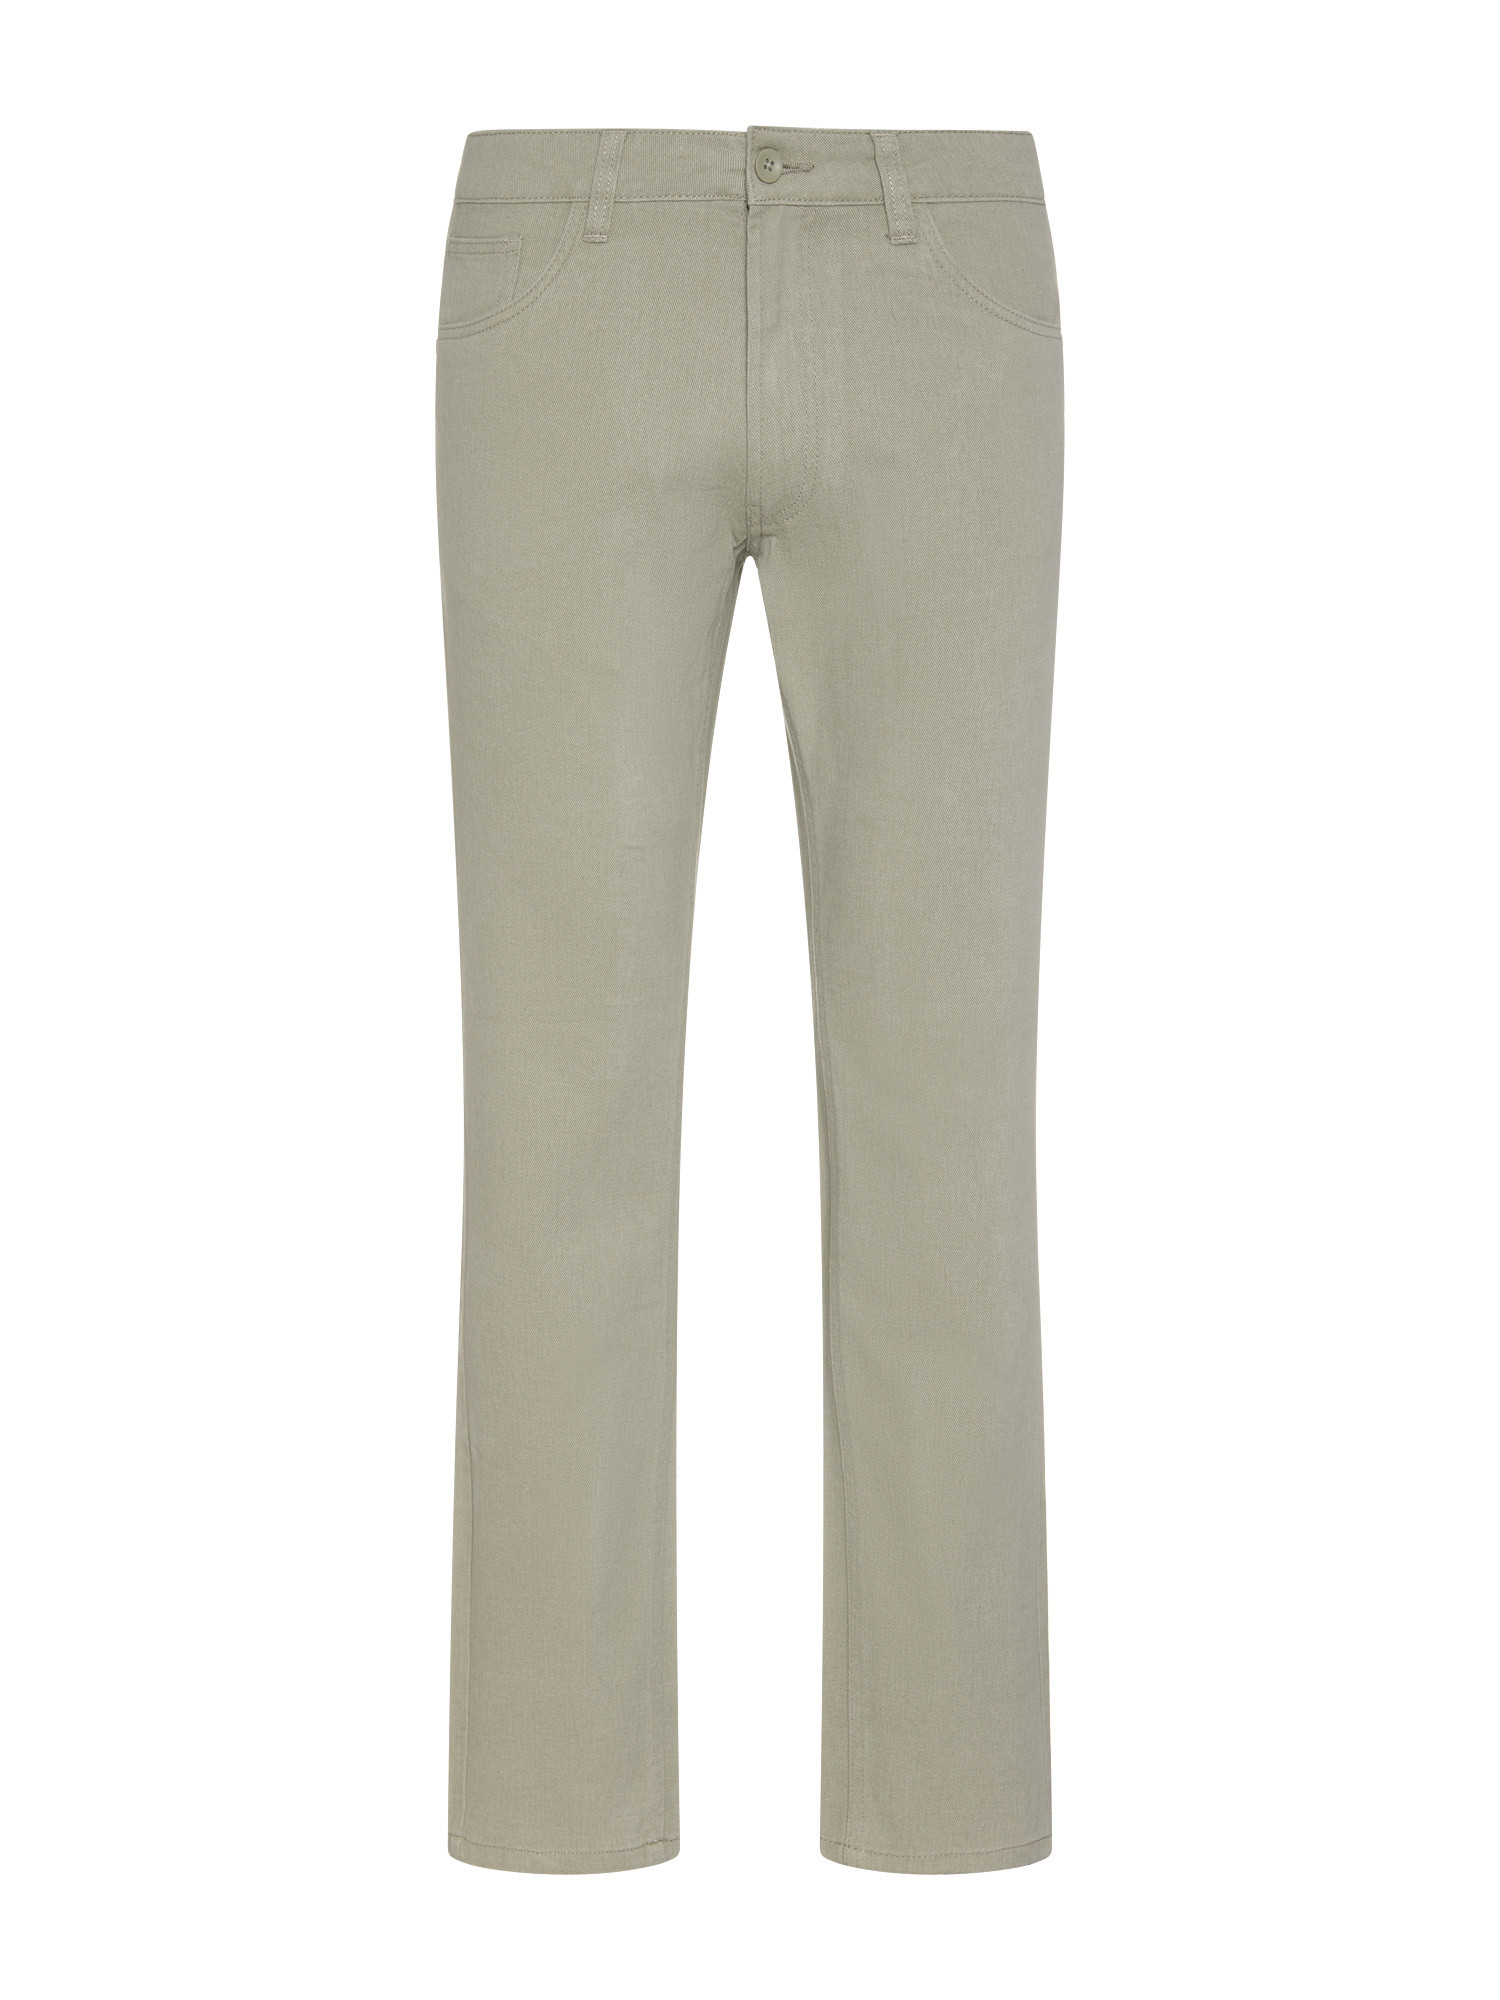 JCT - Regular fit five pocket trousers in pure cotton, Sage Green, large image number 0